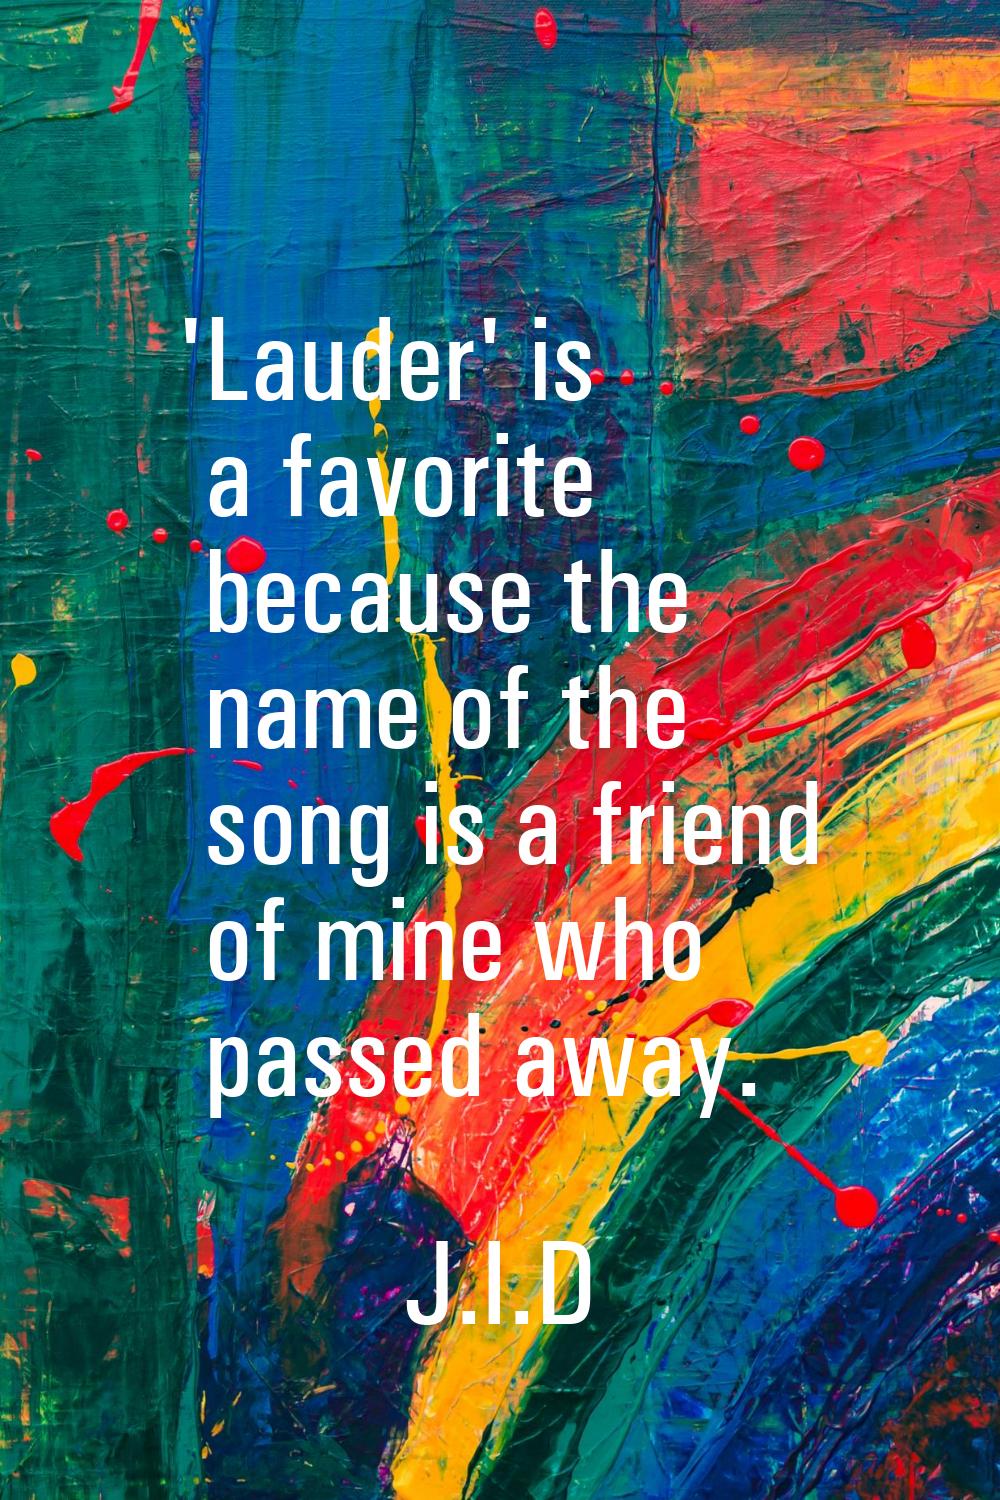 'Lauder' is a favorite because the name of the song is a friend of mine who passed away.